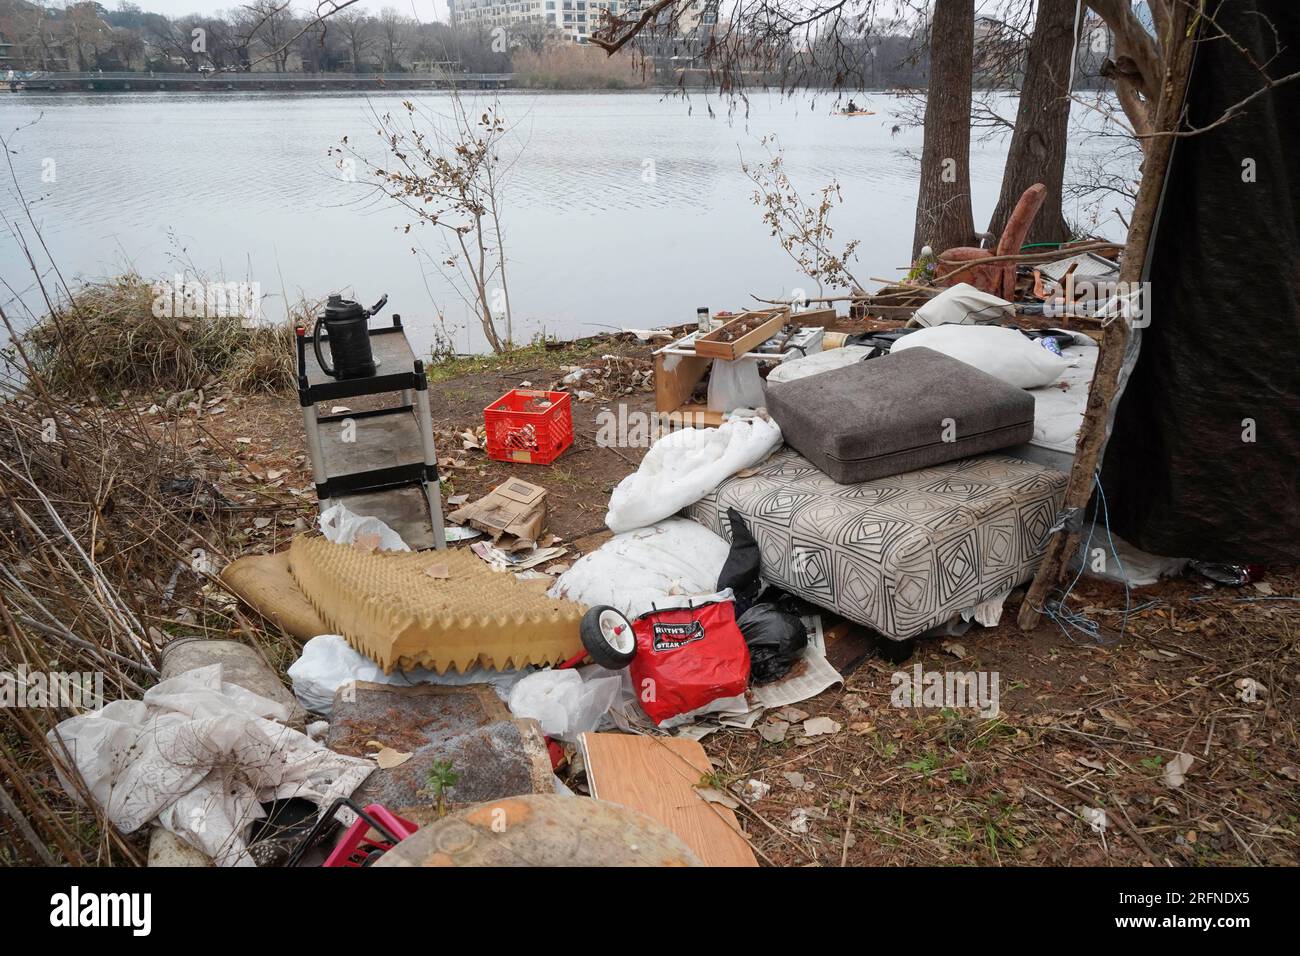 Austin Texas USA, January 2 2023: Trash and belongings from a long-time homeless camp line the north shore of Lady Bird Lake near Rainey Street in downtown Austin. City officials are struggling with homelessness issues along the popular hike and bike trails on public parkland that ring the lake. ©Bob Daemmrich Stock Photo